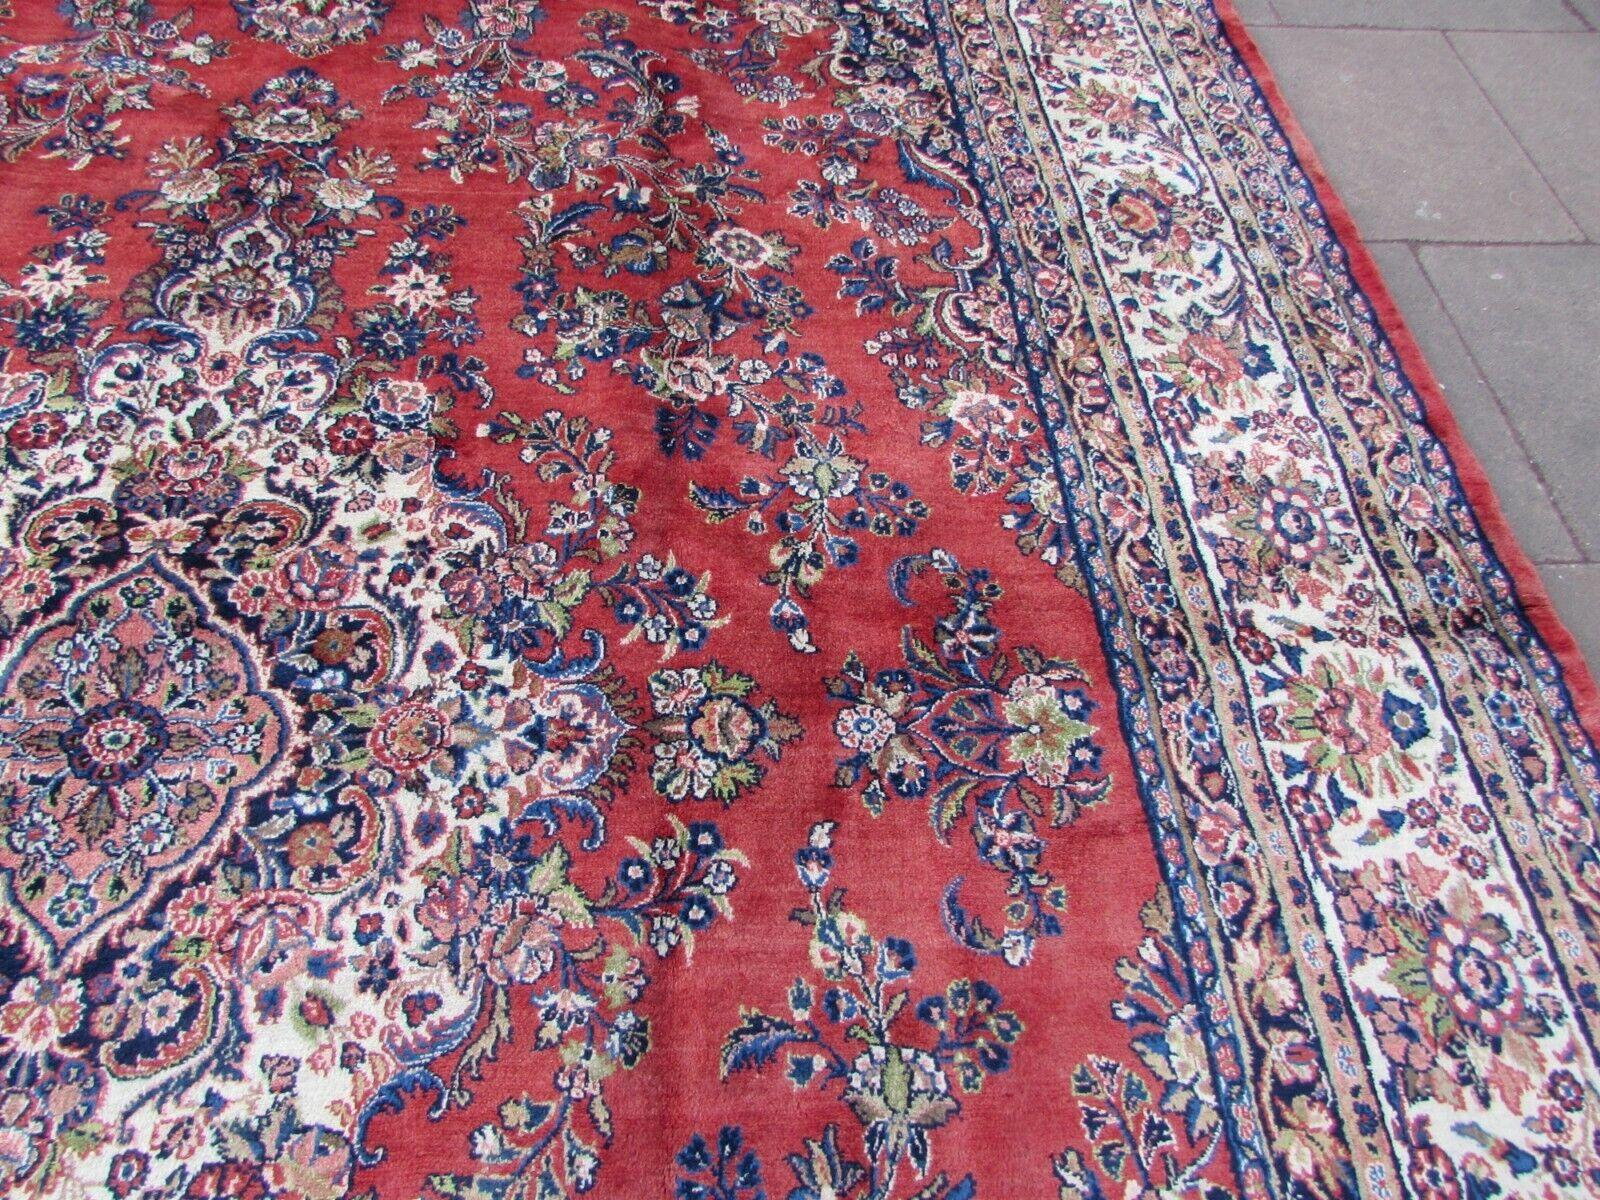 Late 20th Century Handmade Vintage Persian Style Sarouk Oversize Rug 10.3' x 16.2', 1970s, 1Q58 For Sale